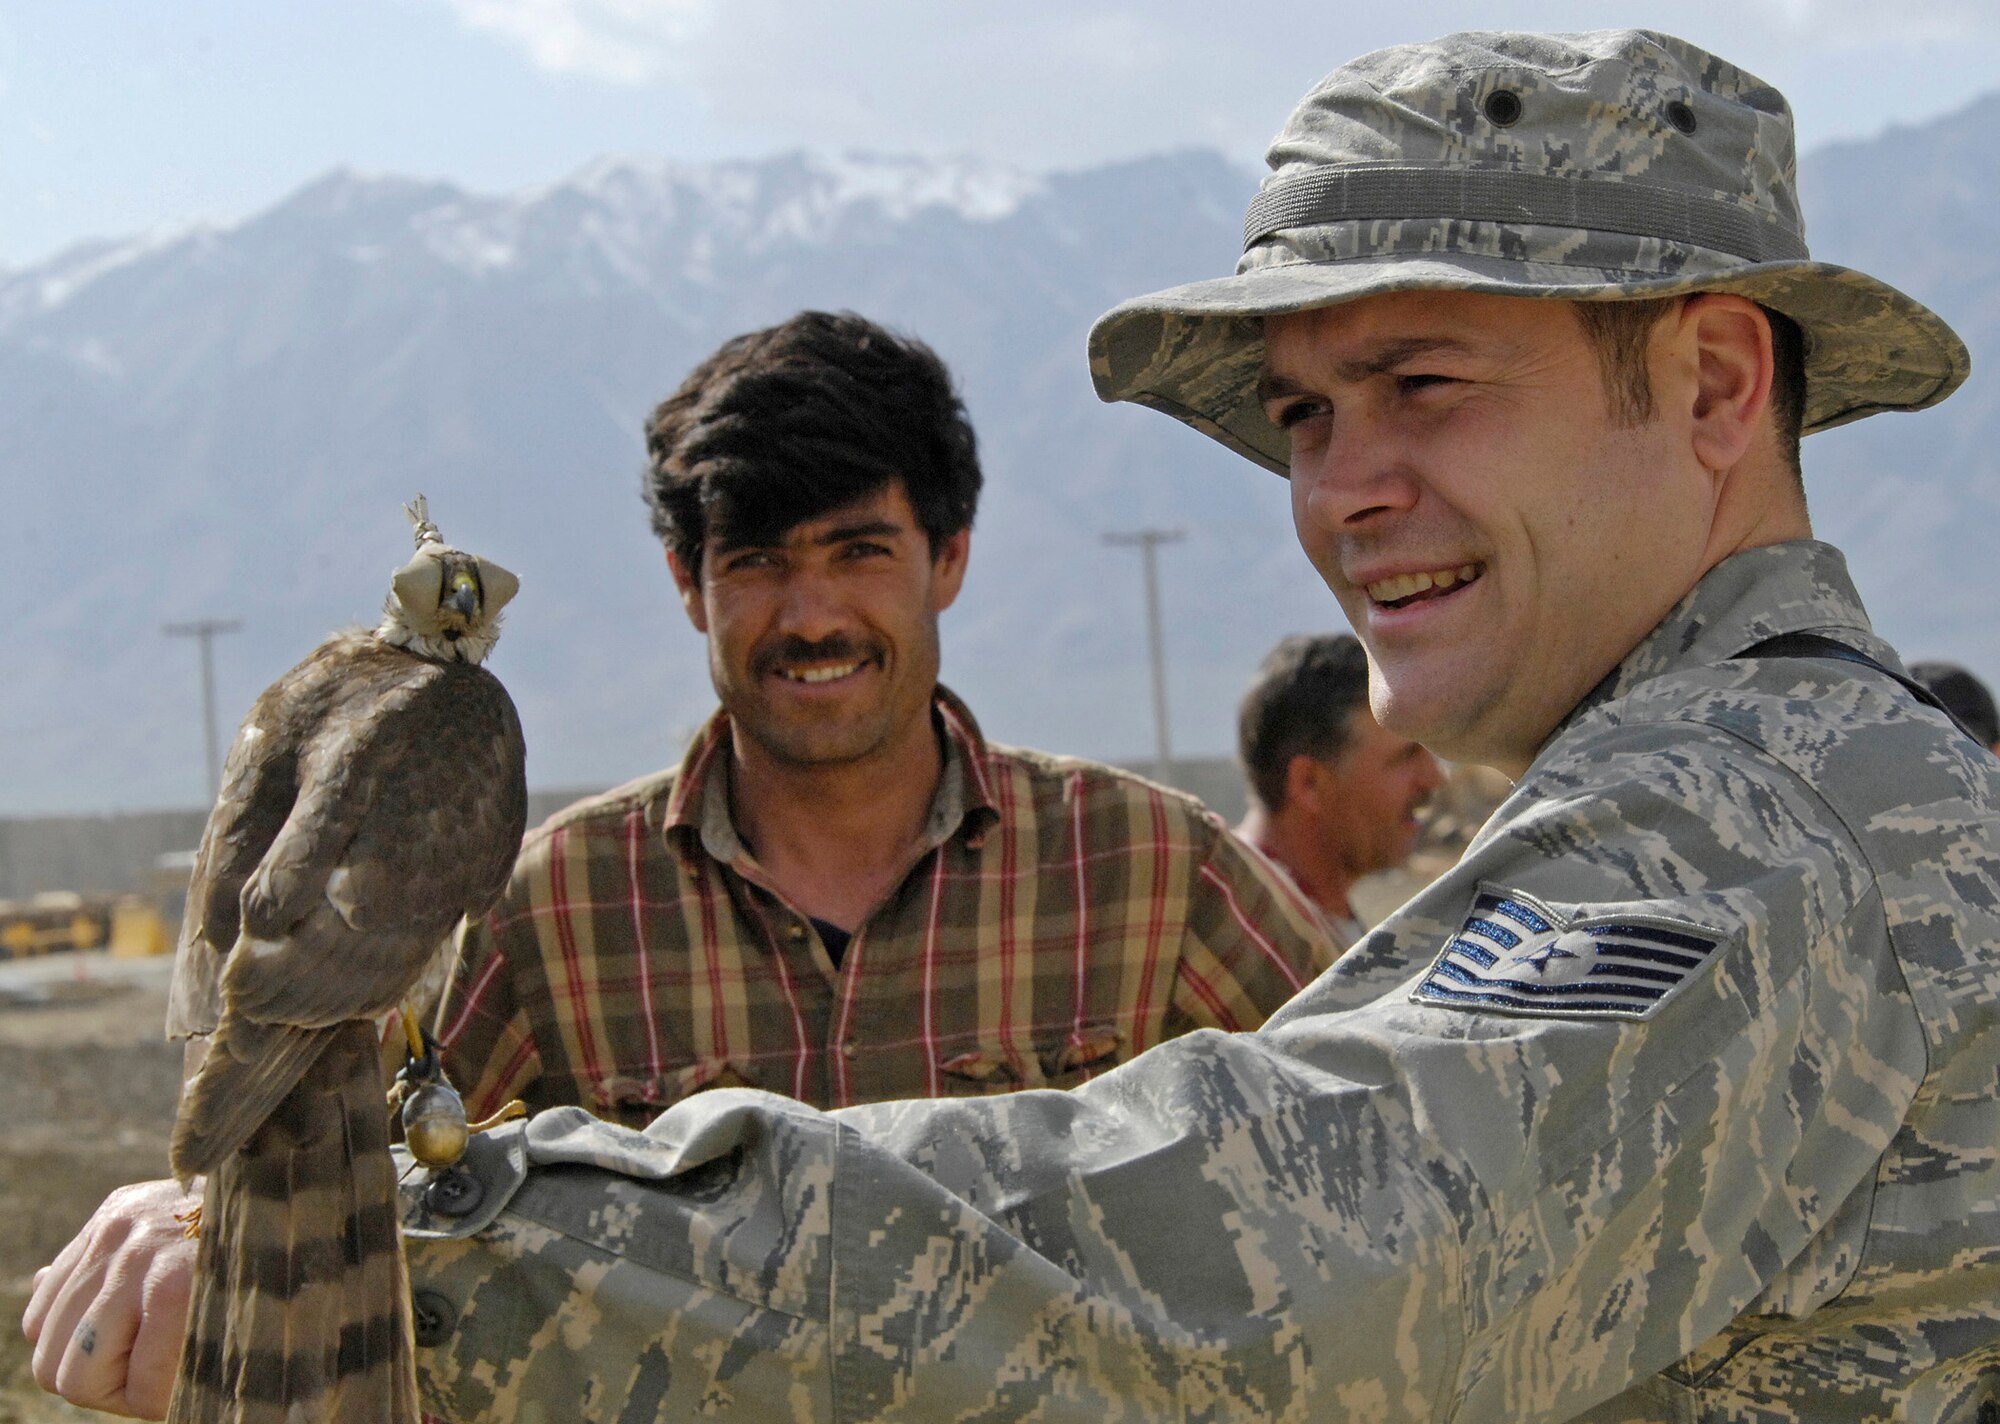 Tech. Sgt. Shane Sweeney, 455th Air Expeditionary Wing weapons safety, holds out a falcon trained by a local Afghan falconer to catch much larger black kite birds that have infested areas near Bagram Air Field's flightline. The falcon's feet are rigged with snare traps so that when the larger kite bird attacks it gets tangled with the falcon and falls to the ground. The 455th AEW safety office hired three local falconers to supplement an aggressive Bird Aircraft Strike Hazard program to reduce the number of bird strikes here.